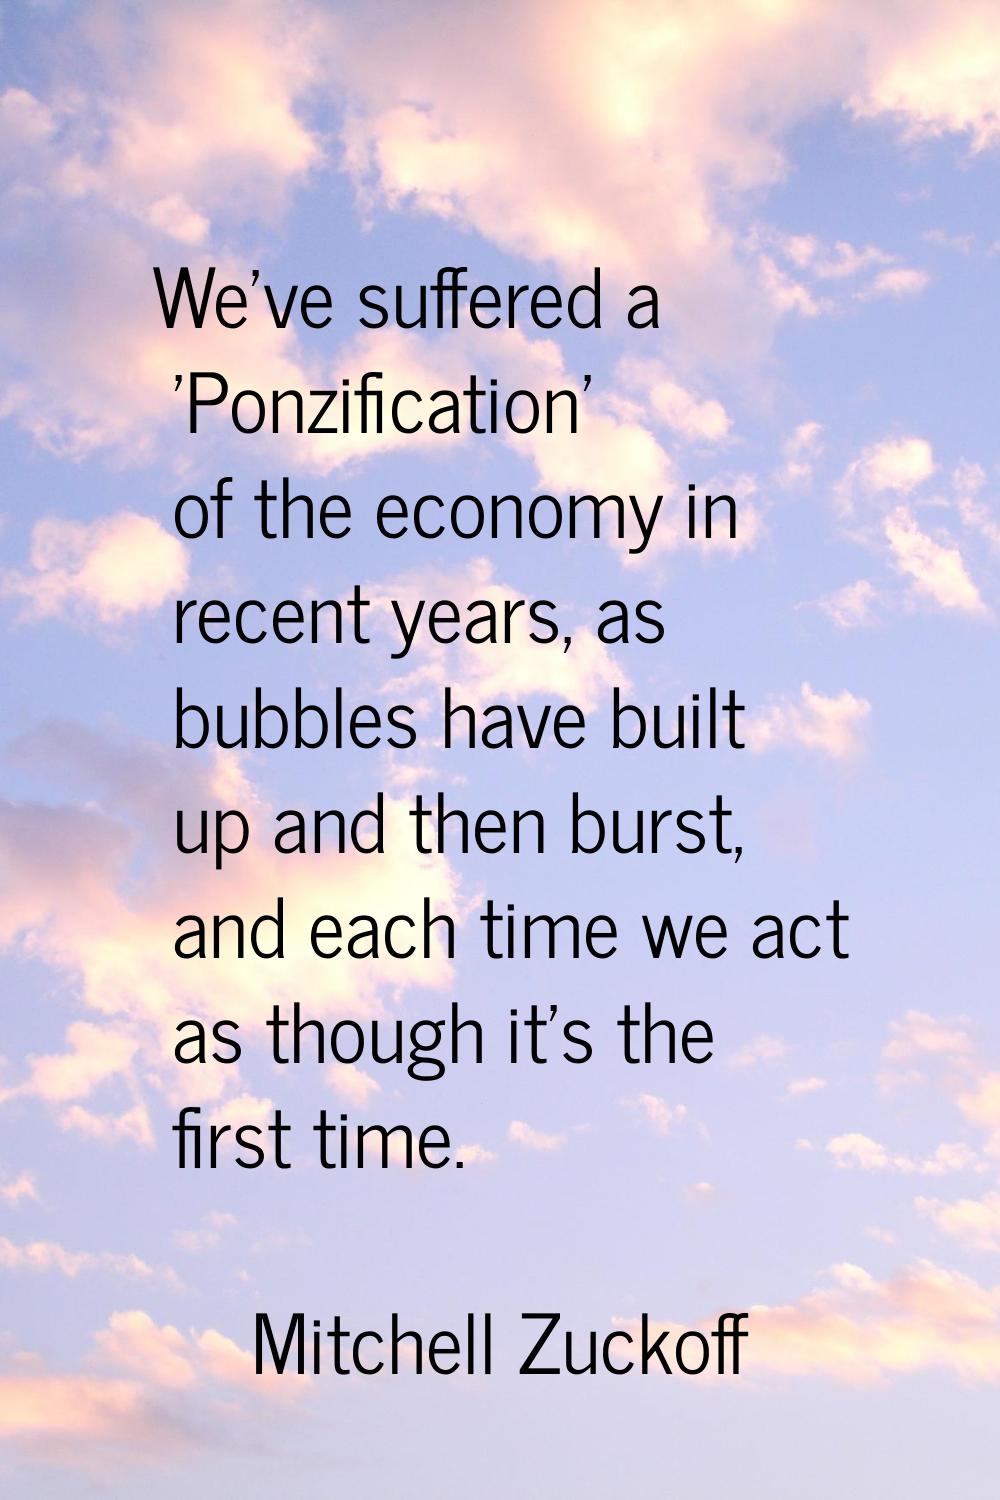 We've suffered a 'Ponzification' of the economy in recent years, as bubbles have built up and then 